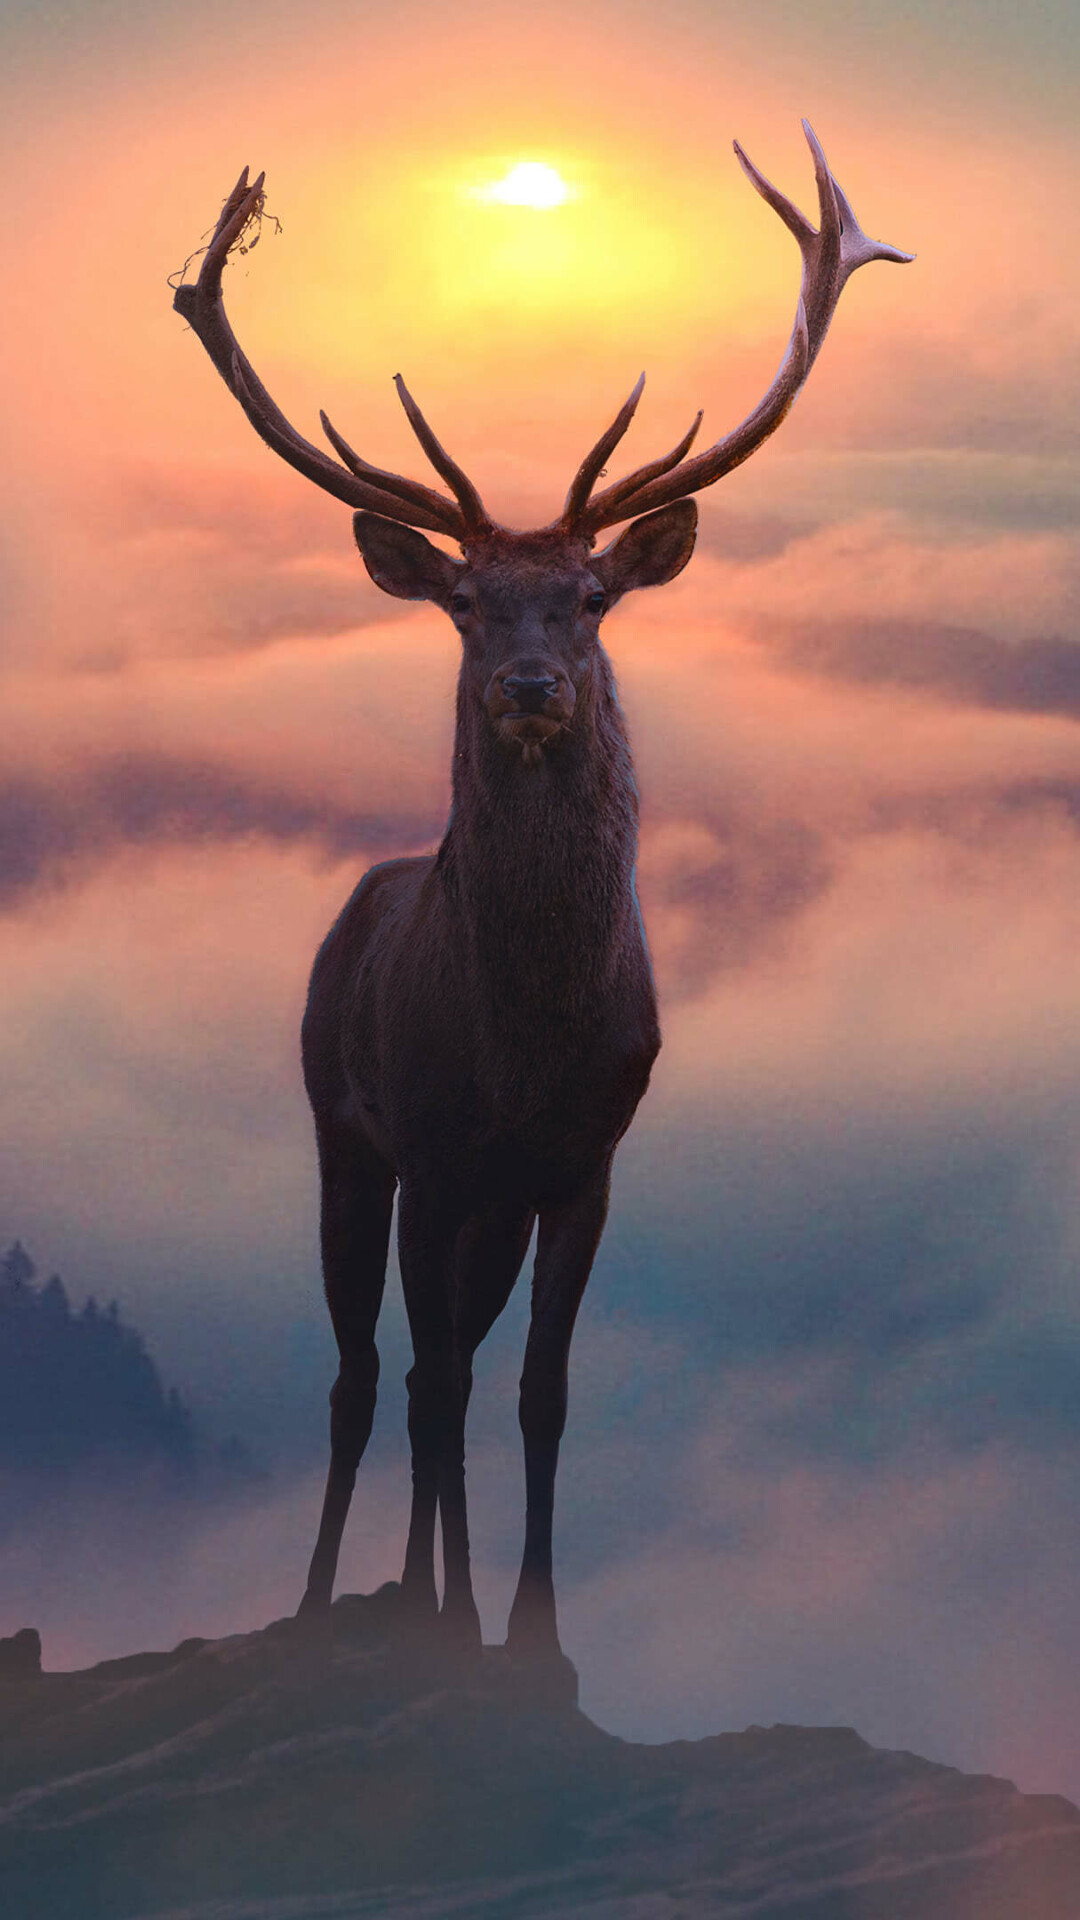 Reindeer: The tundra subspecies are adapted for extreme cold. 1080x1920 Full HD Wallpaper.